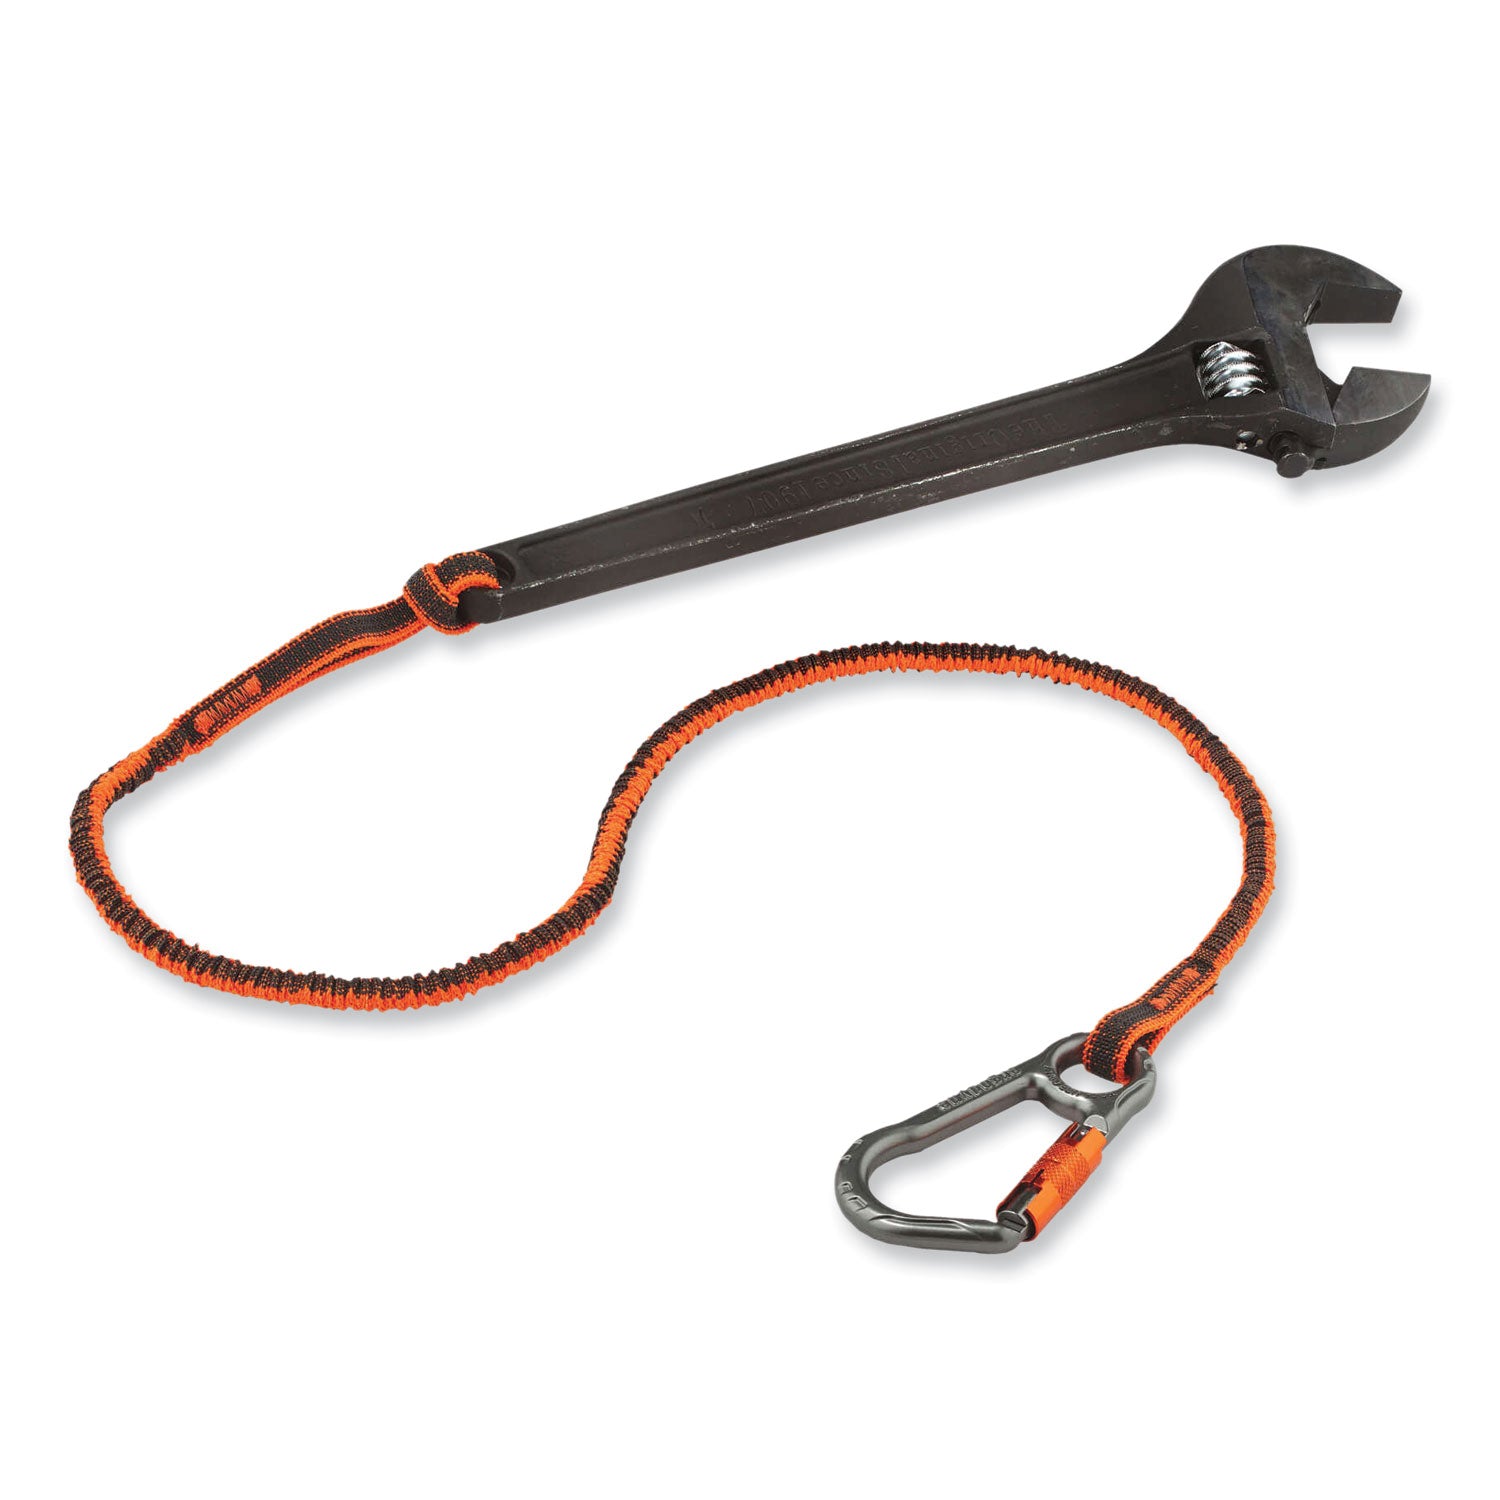 squids-3108fxtool-lanyard-w-locking-aluminum-carabiner+loop-15lb-max-work-cap-38-to-48or-gyships-in-1-3-business-days_ego19808 - 3